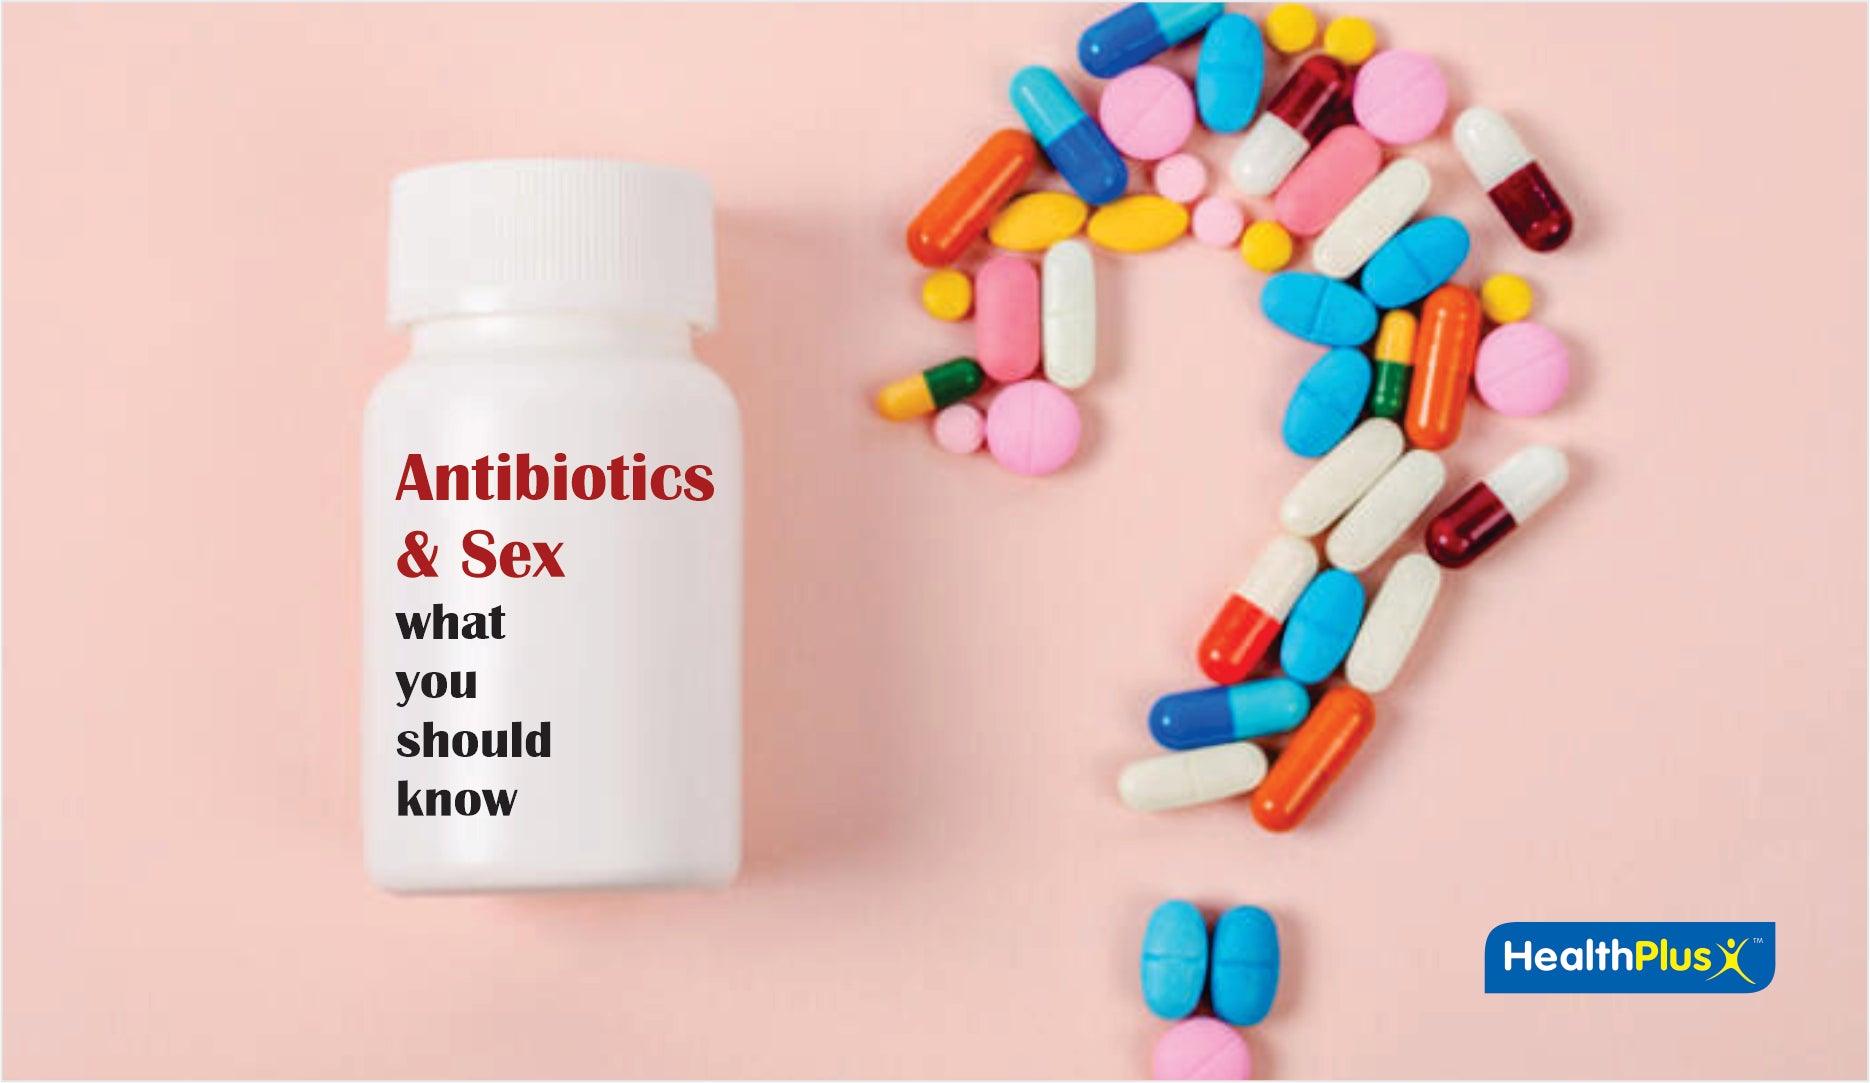 Antibiotics and Sex: What You Should Know  - HealthPlus